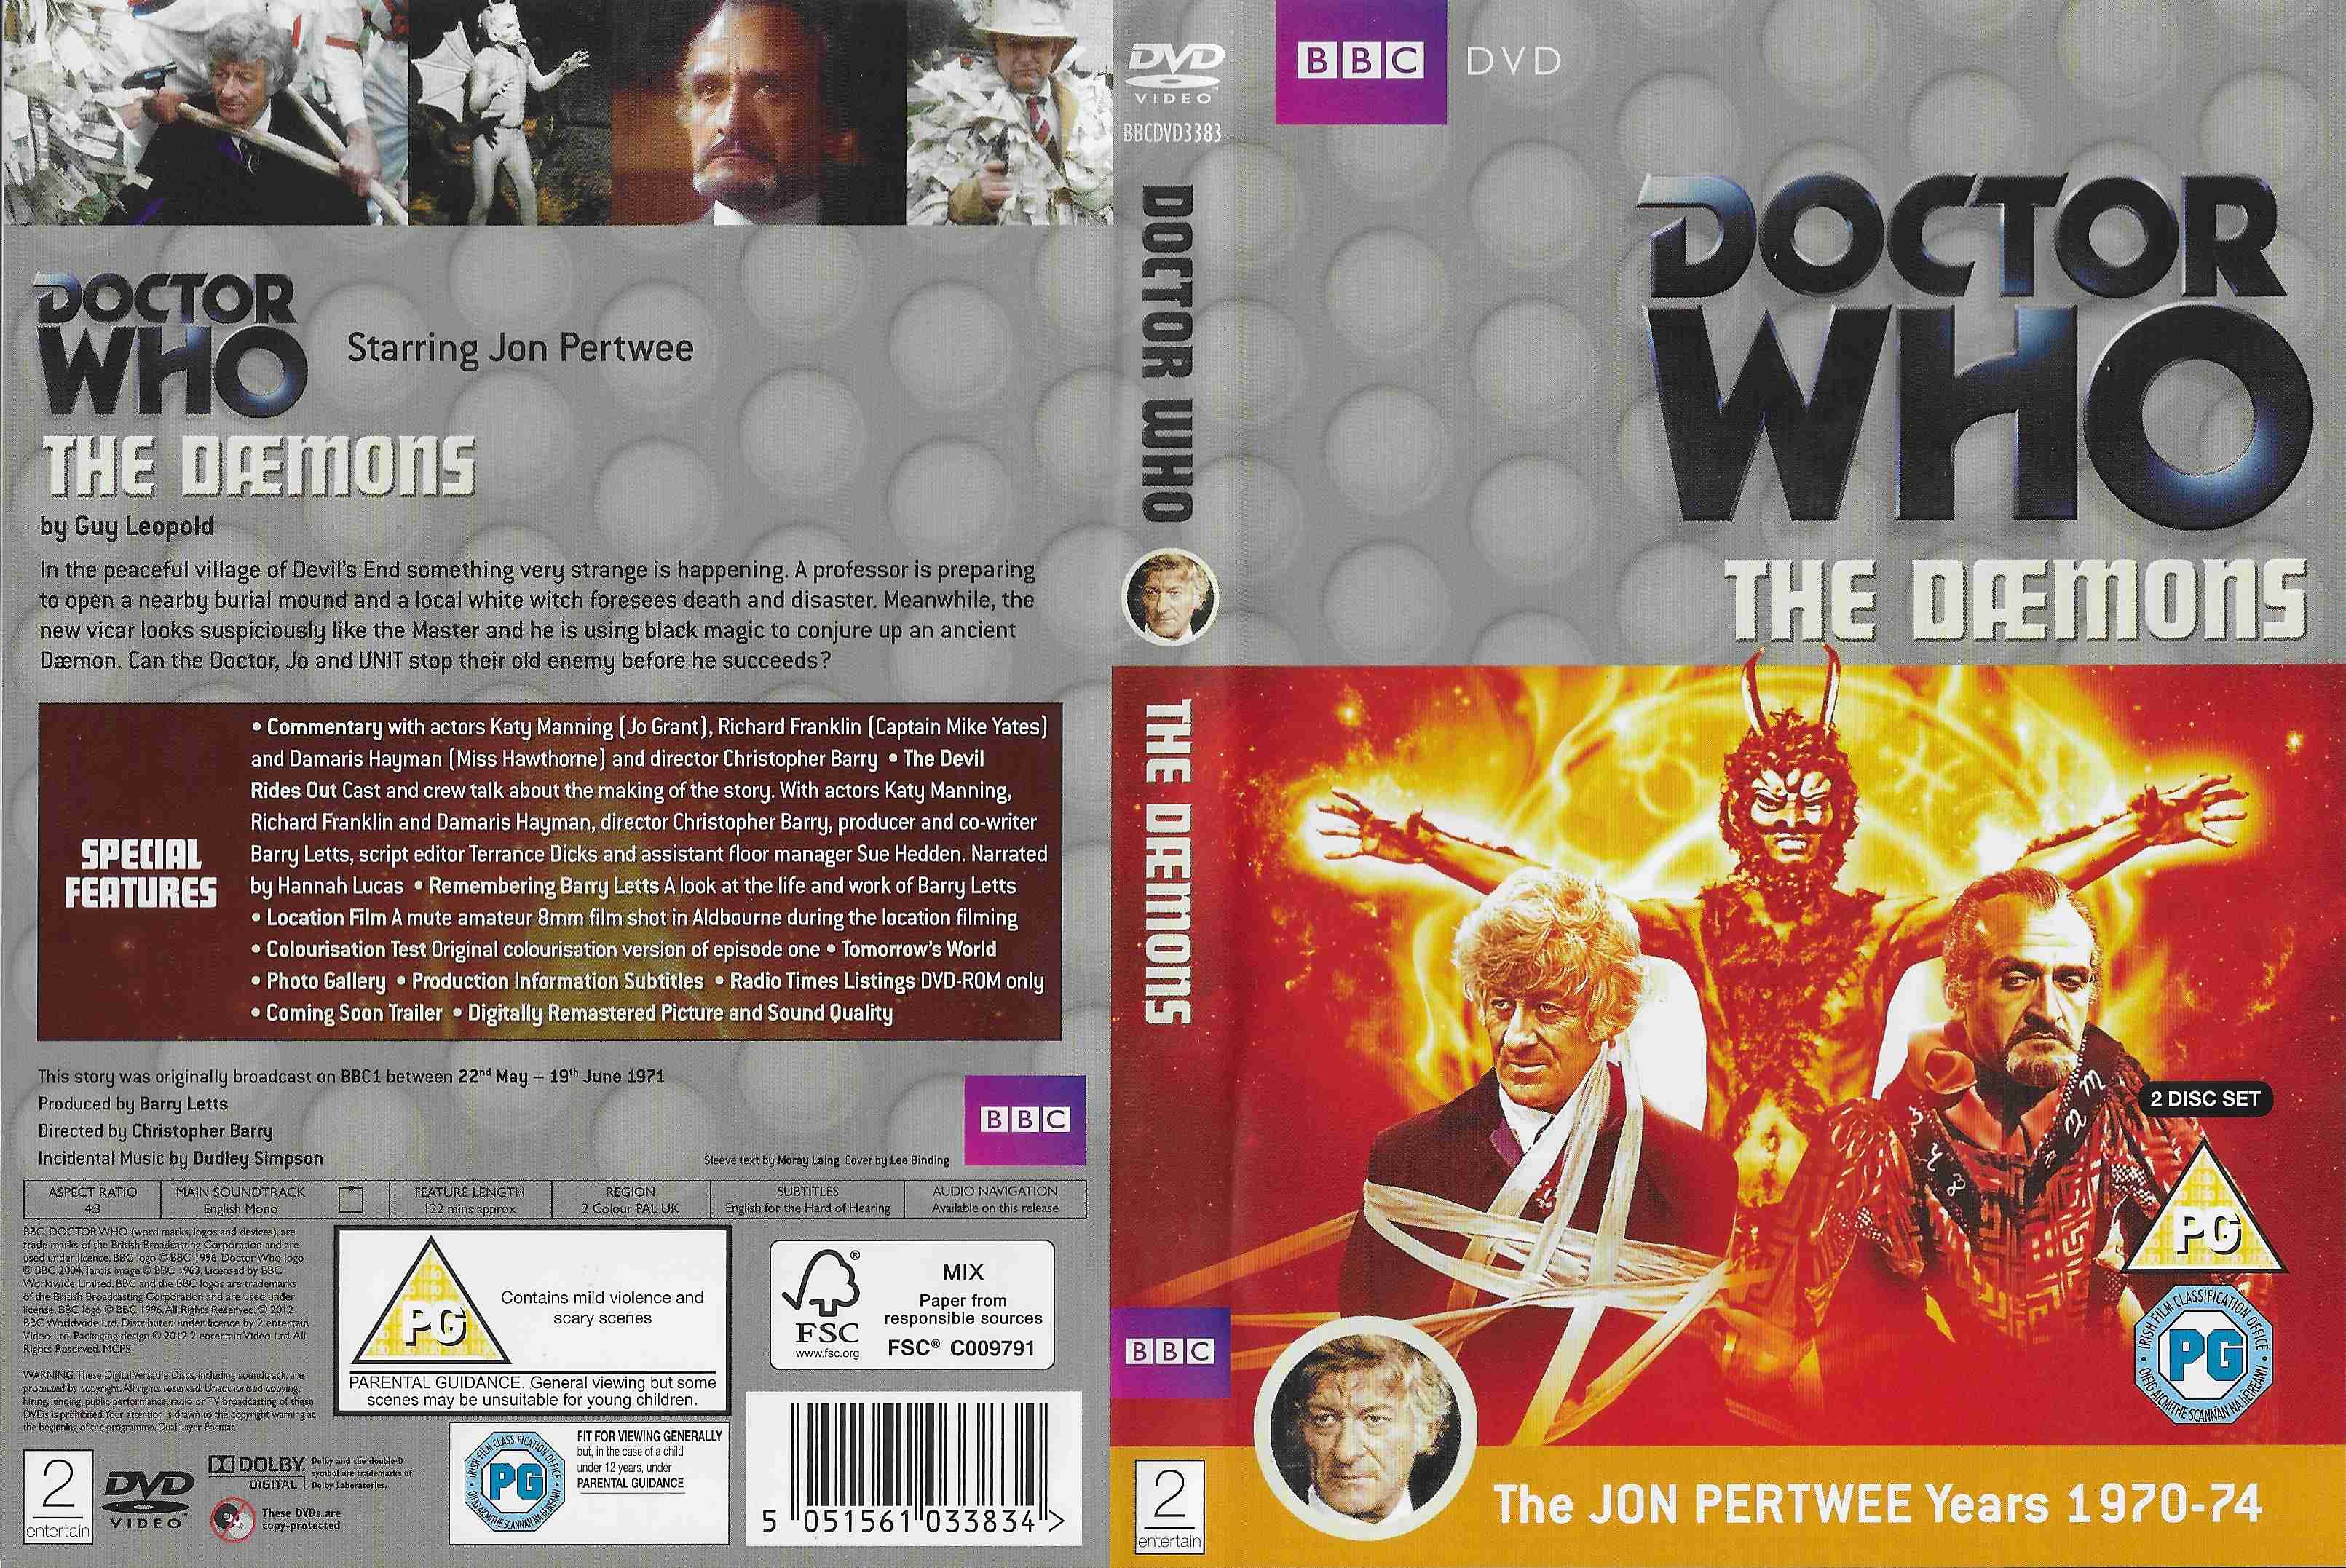 Picture of BBCDVD 3383 Doctor Who - The Daemons by artist Guy Leopold from the BBC records and Tapes library